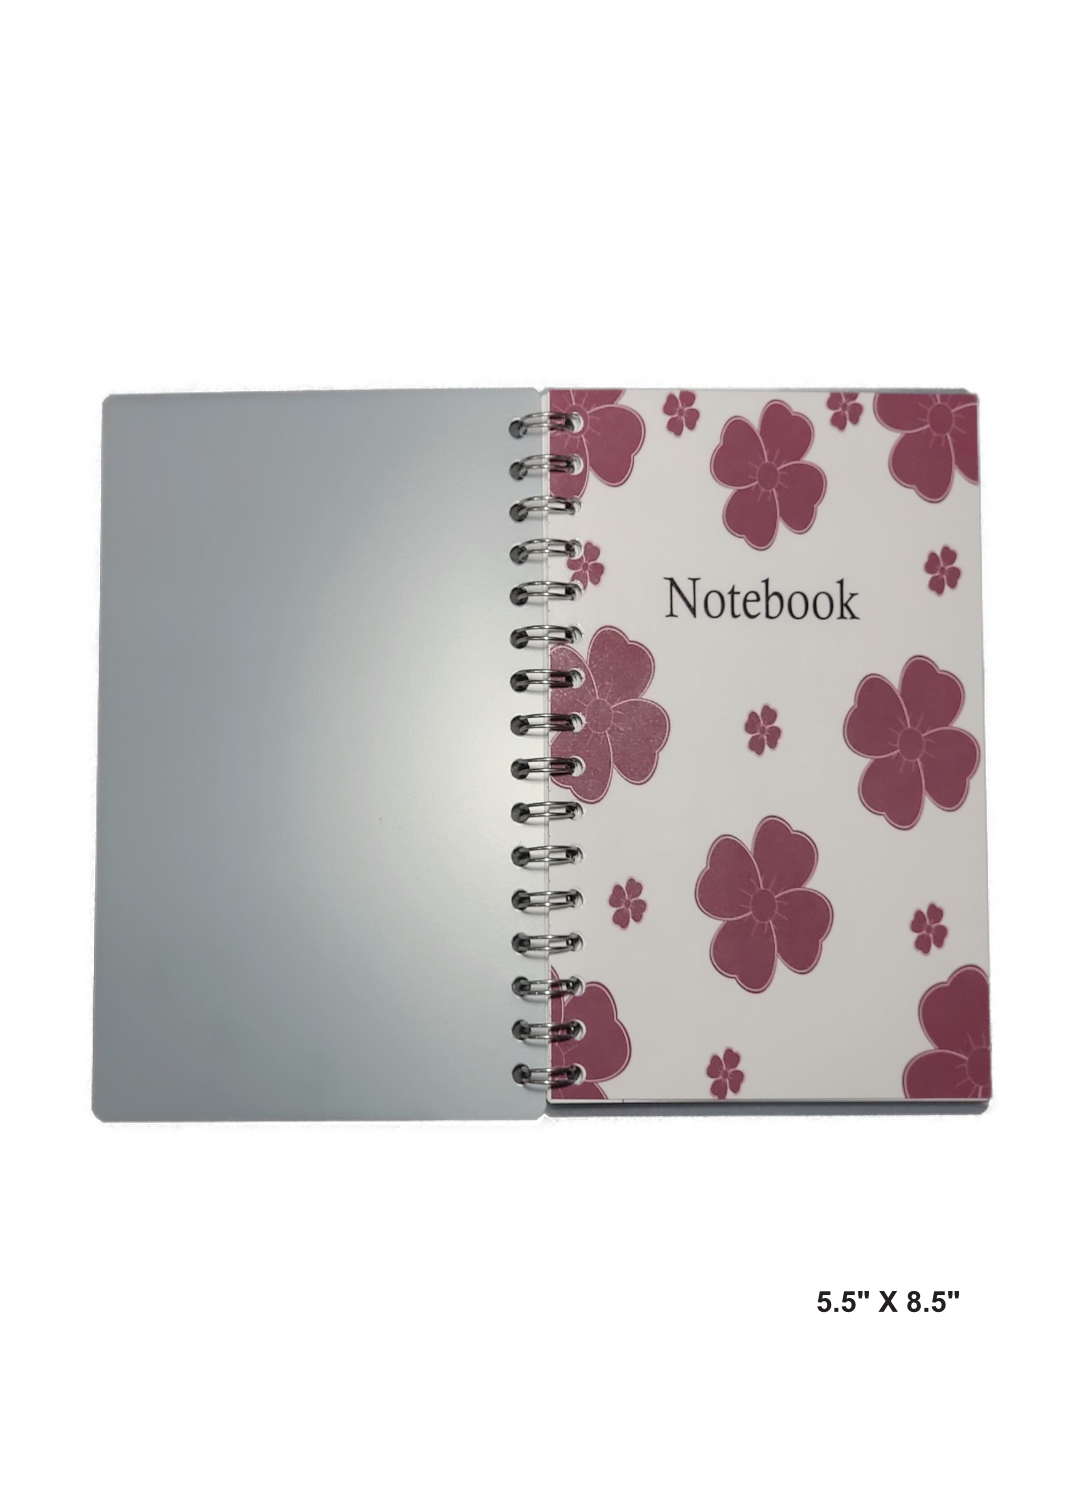 A 5.5" x 8.5" notebook with red flowers. Perfect for note taking or journaling.